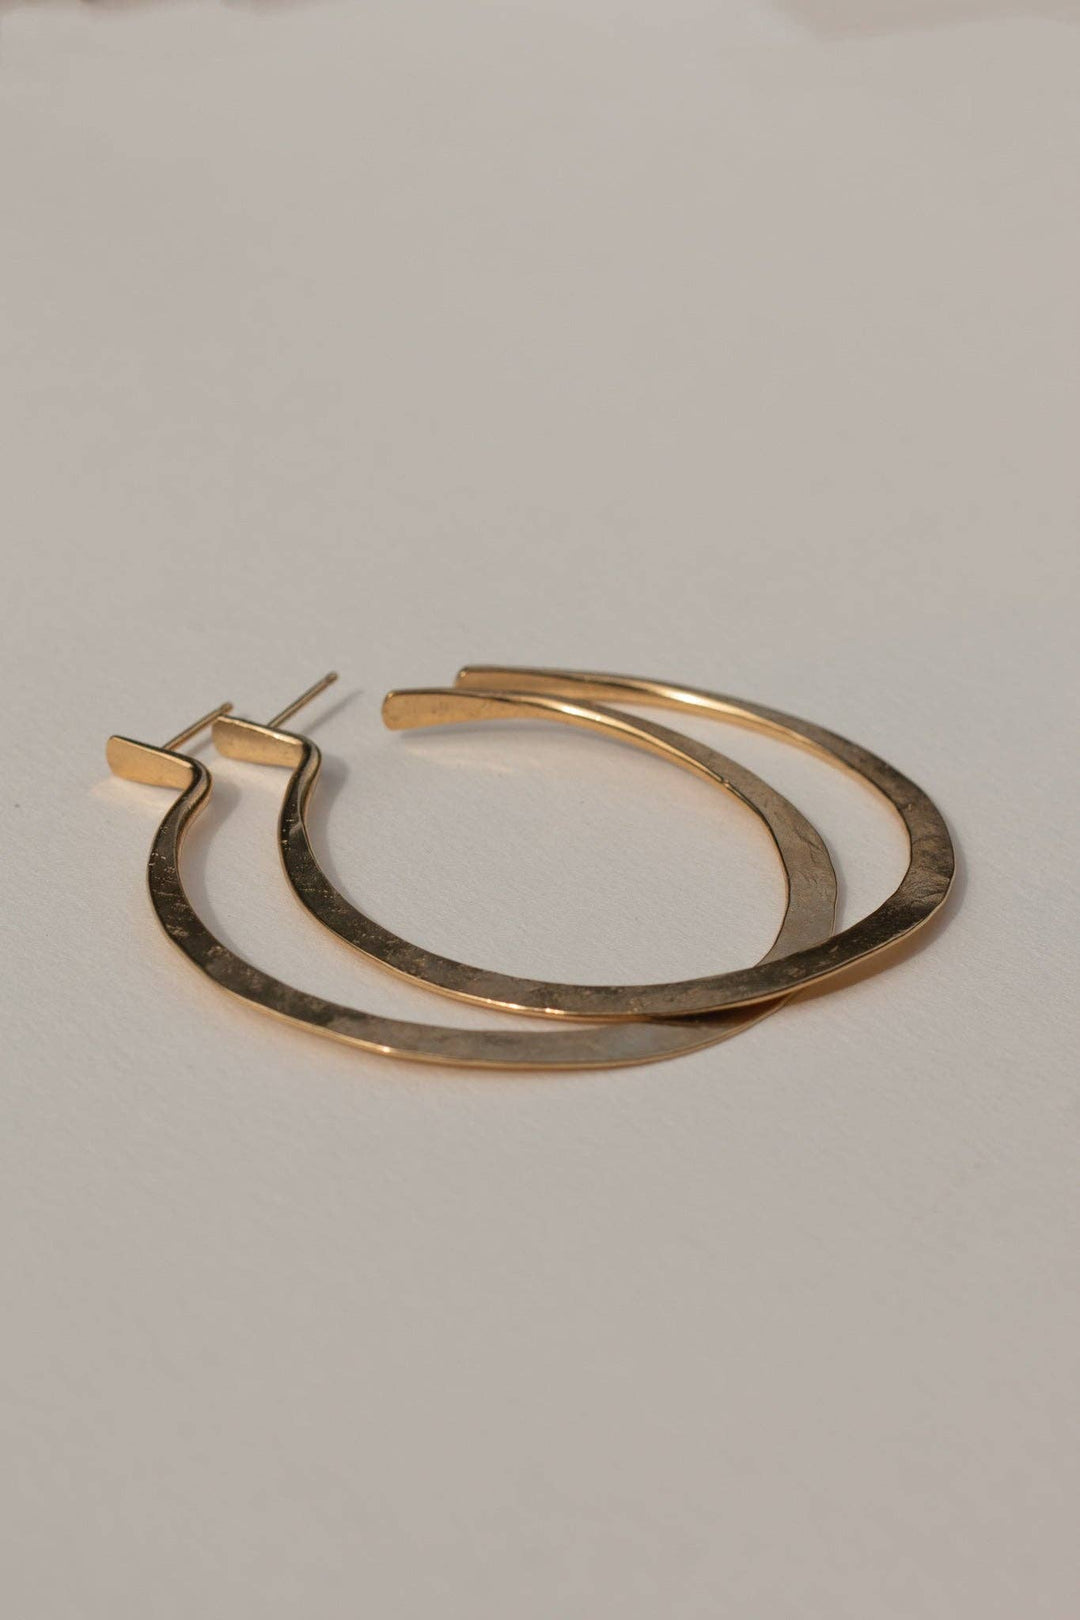 made in malawi These statement hoops feature a unique, textured design, yet are light enough for everyday wear. Make a bold statement without weighing you down with the Lenga Hoops.